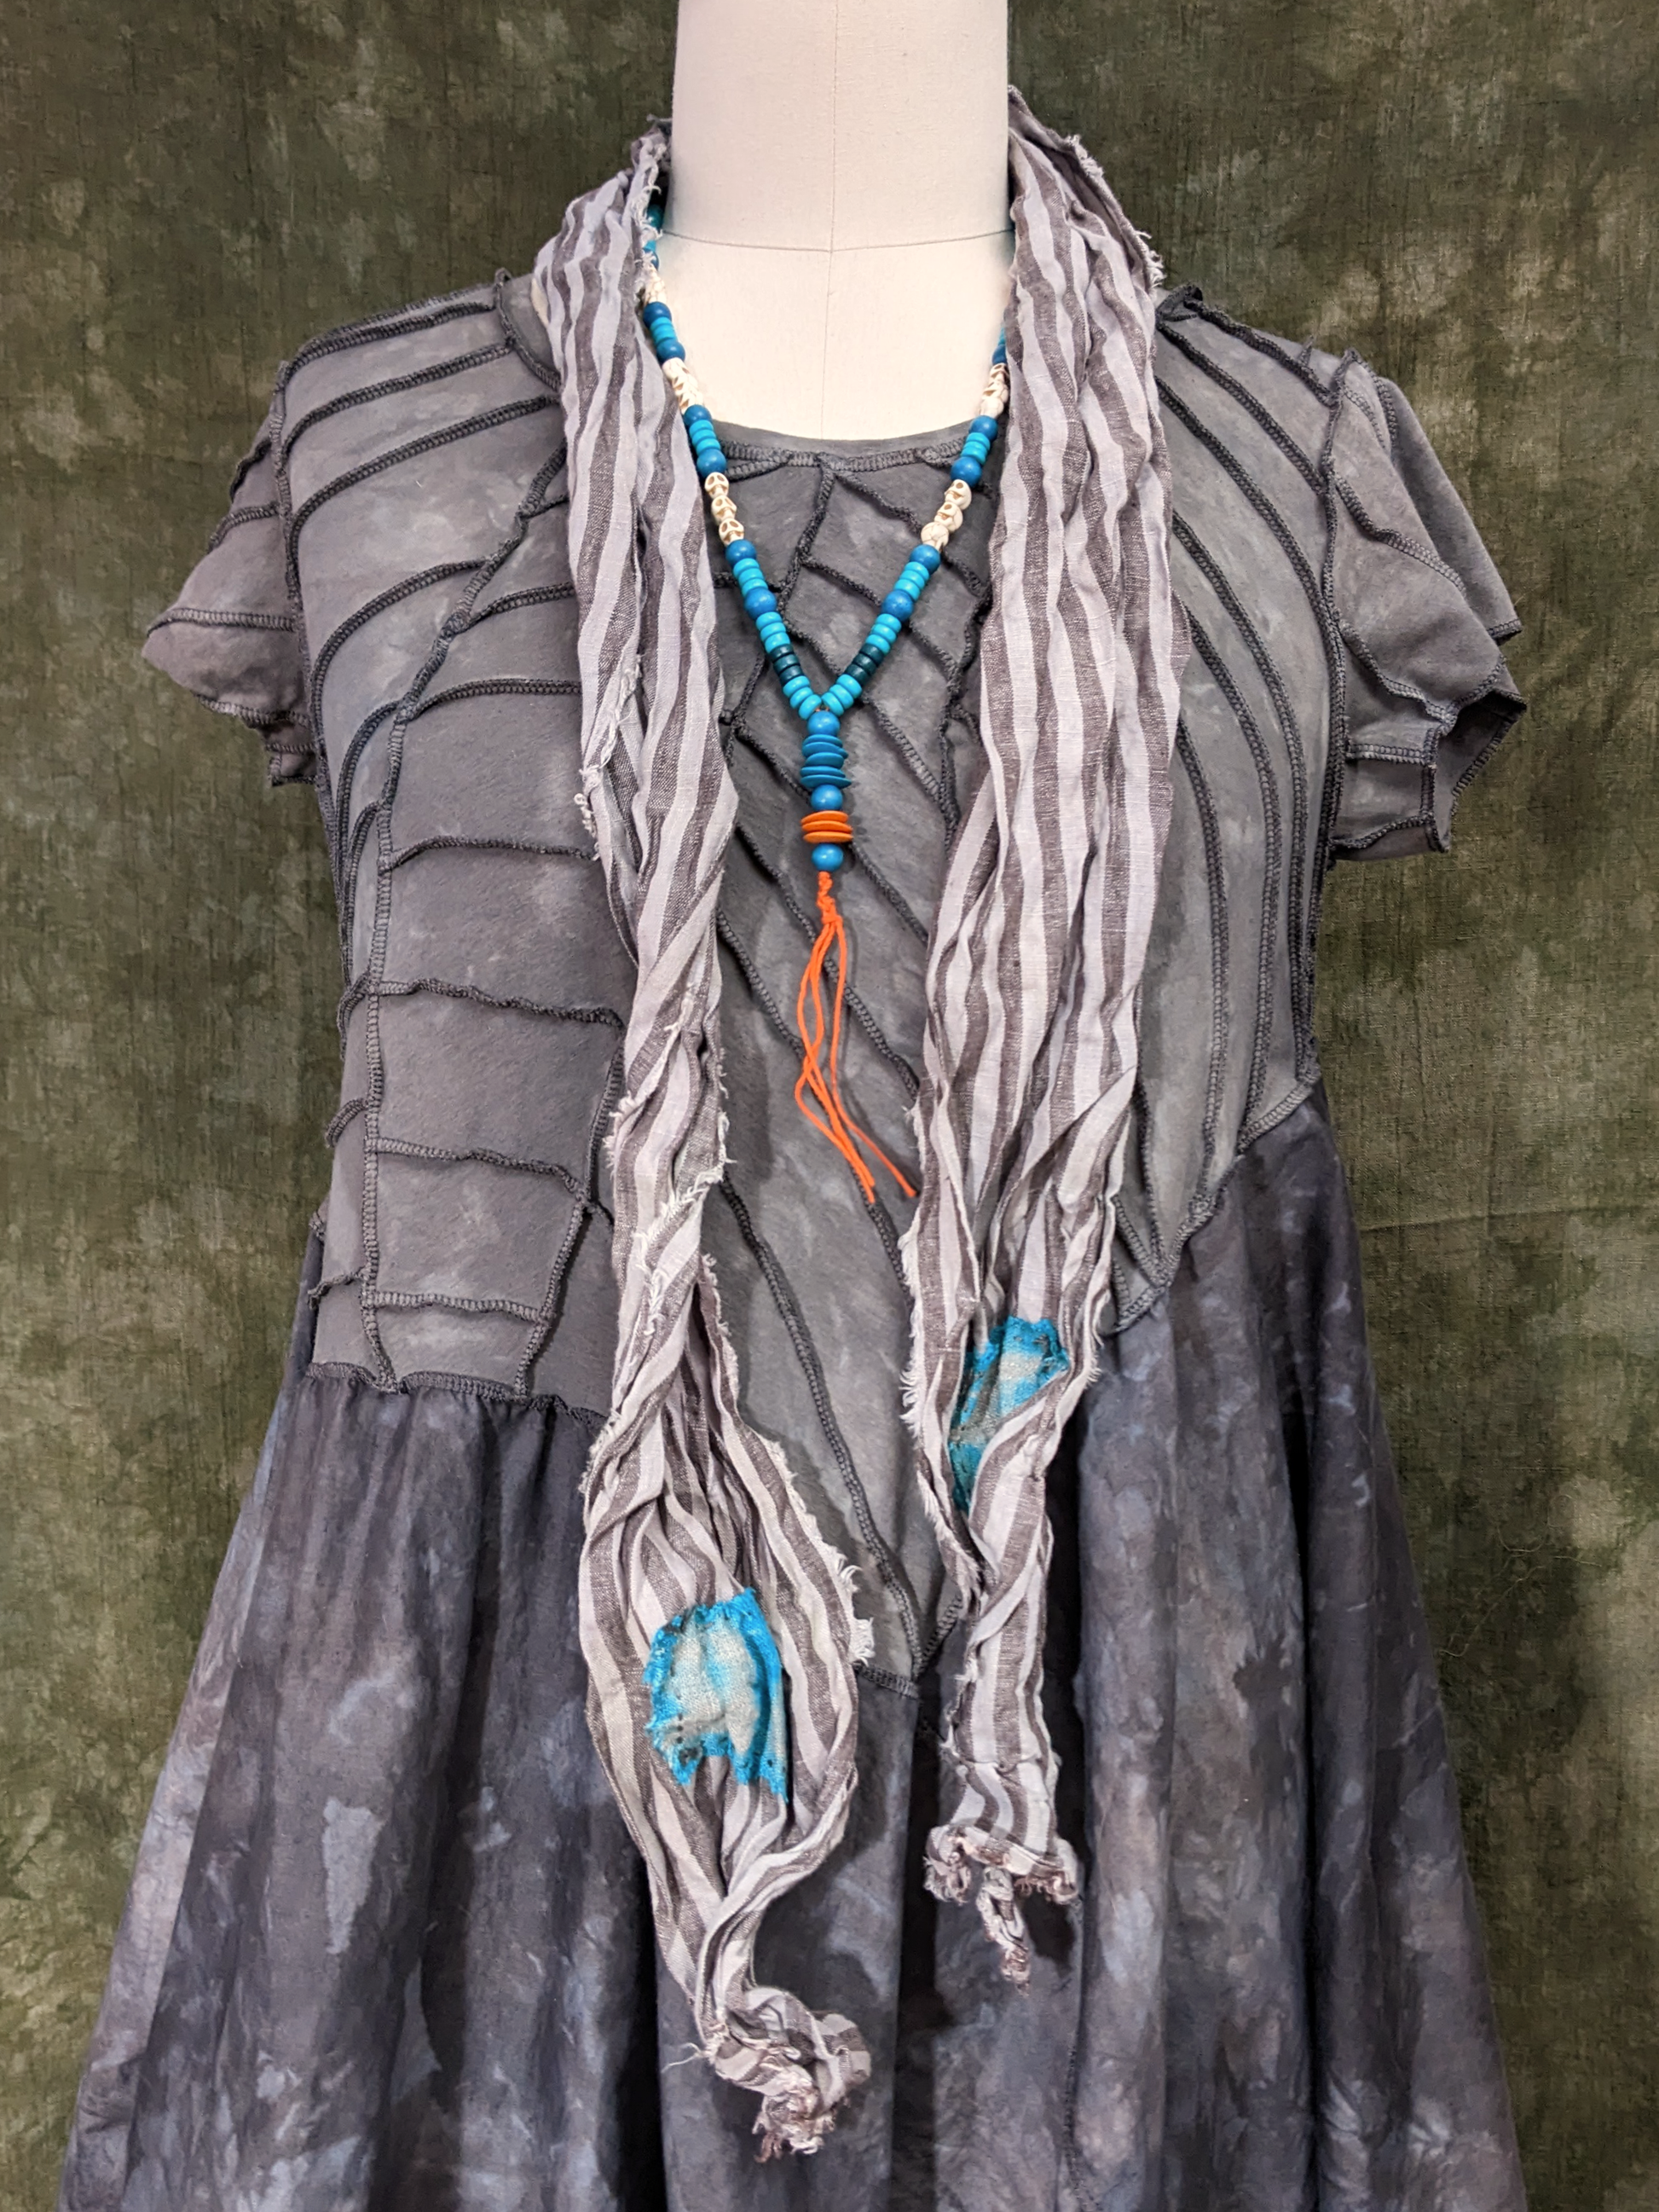 silver-gray and turquoise hand-dyed striped linen scarf with hand-stitched patches